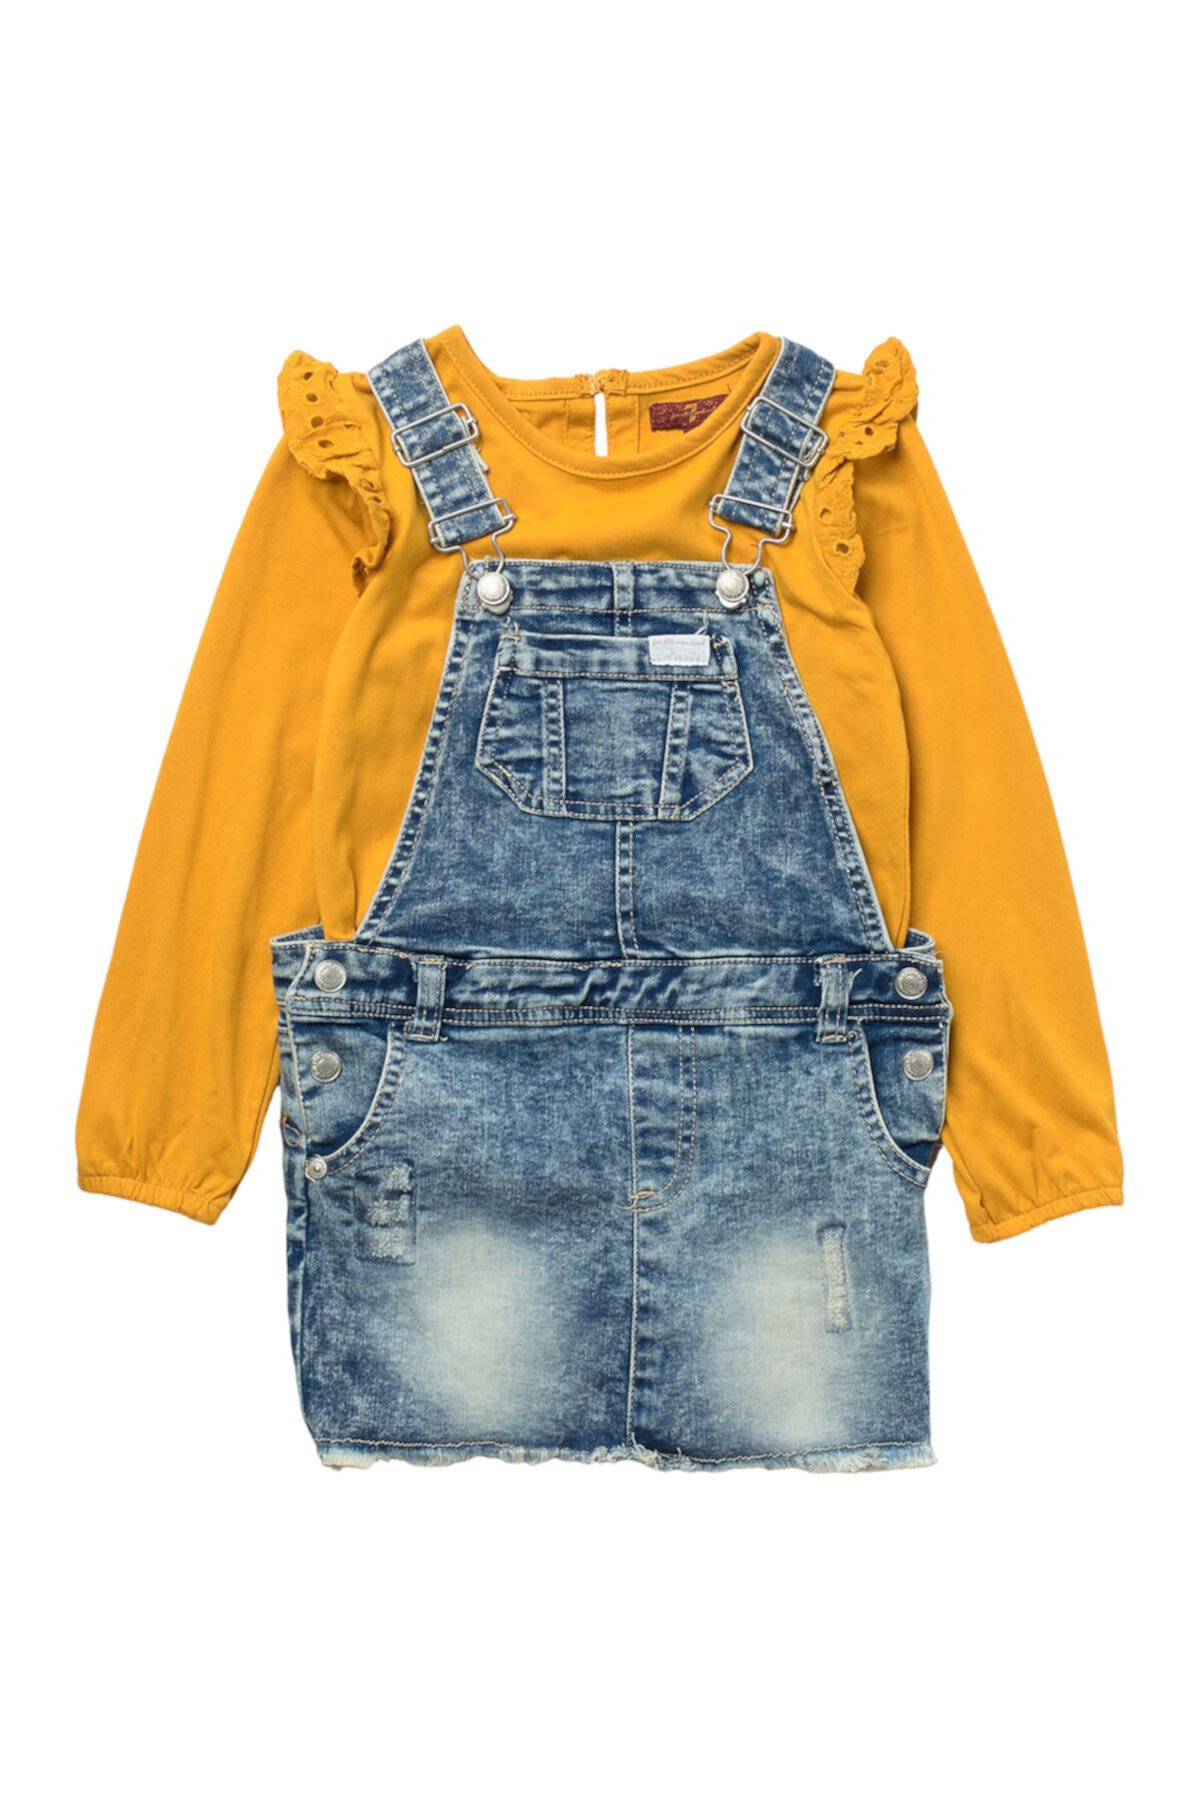 Denim Overall & Ruffle Top 2-Piece Set (Toddler Girls) 7 For All Mankind